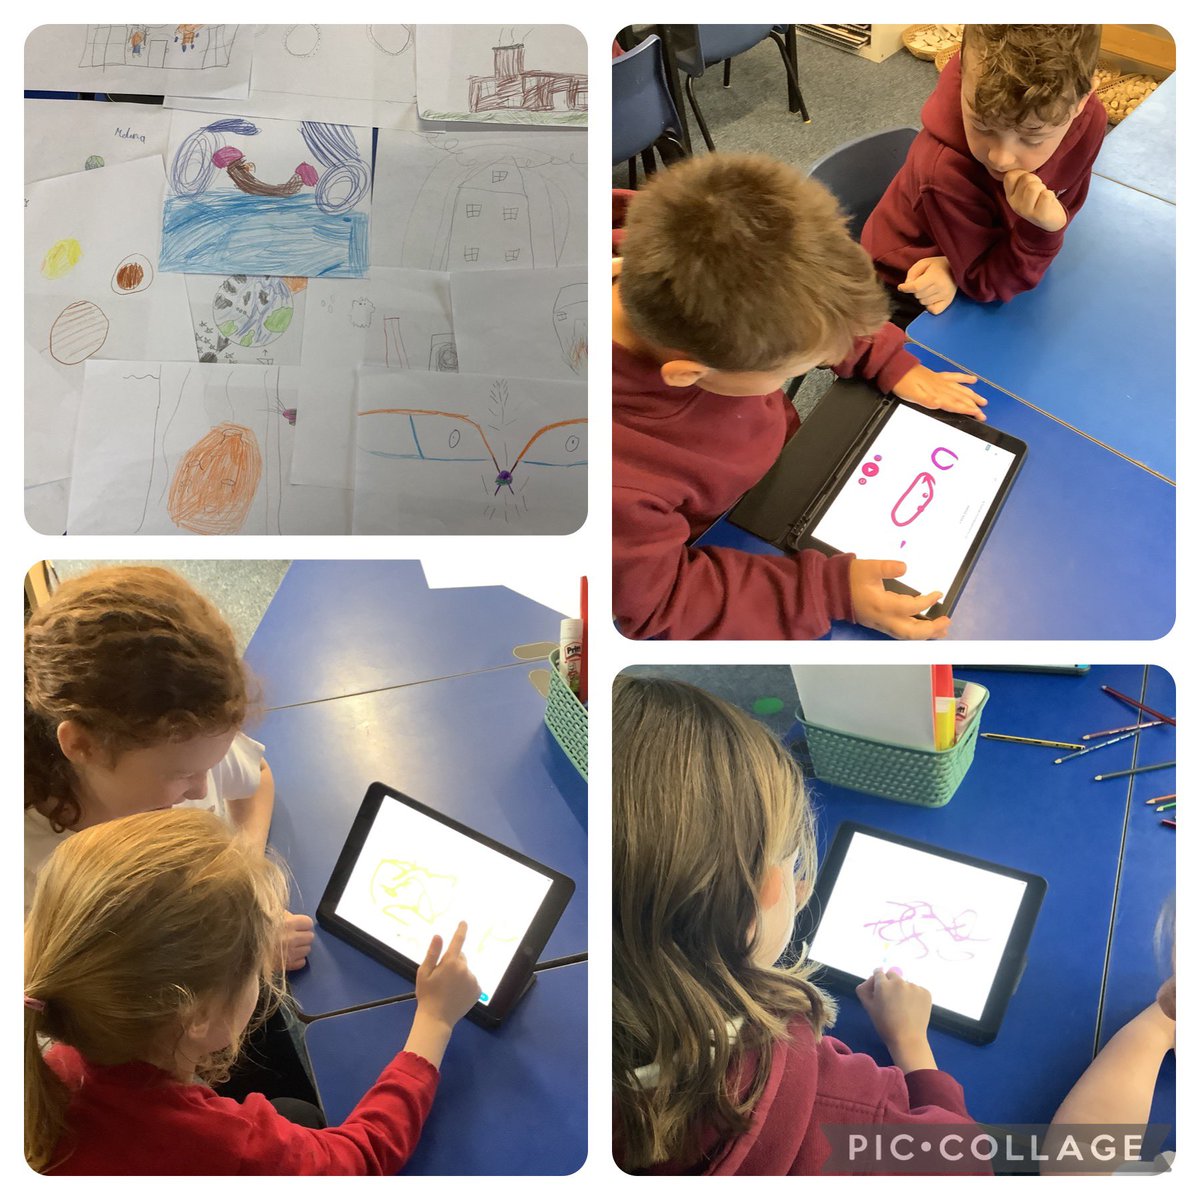 Year 2 listened to The Planets~Neptune by Gustav Holst. They drew patterns, shapes and pictures that they thought represented the music. They then went on to Chrome music lab to experiment with pitch. #llpscomputing